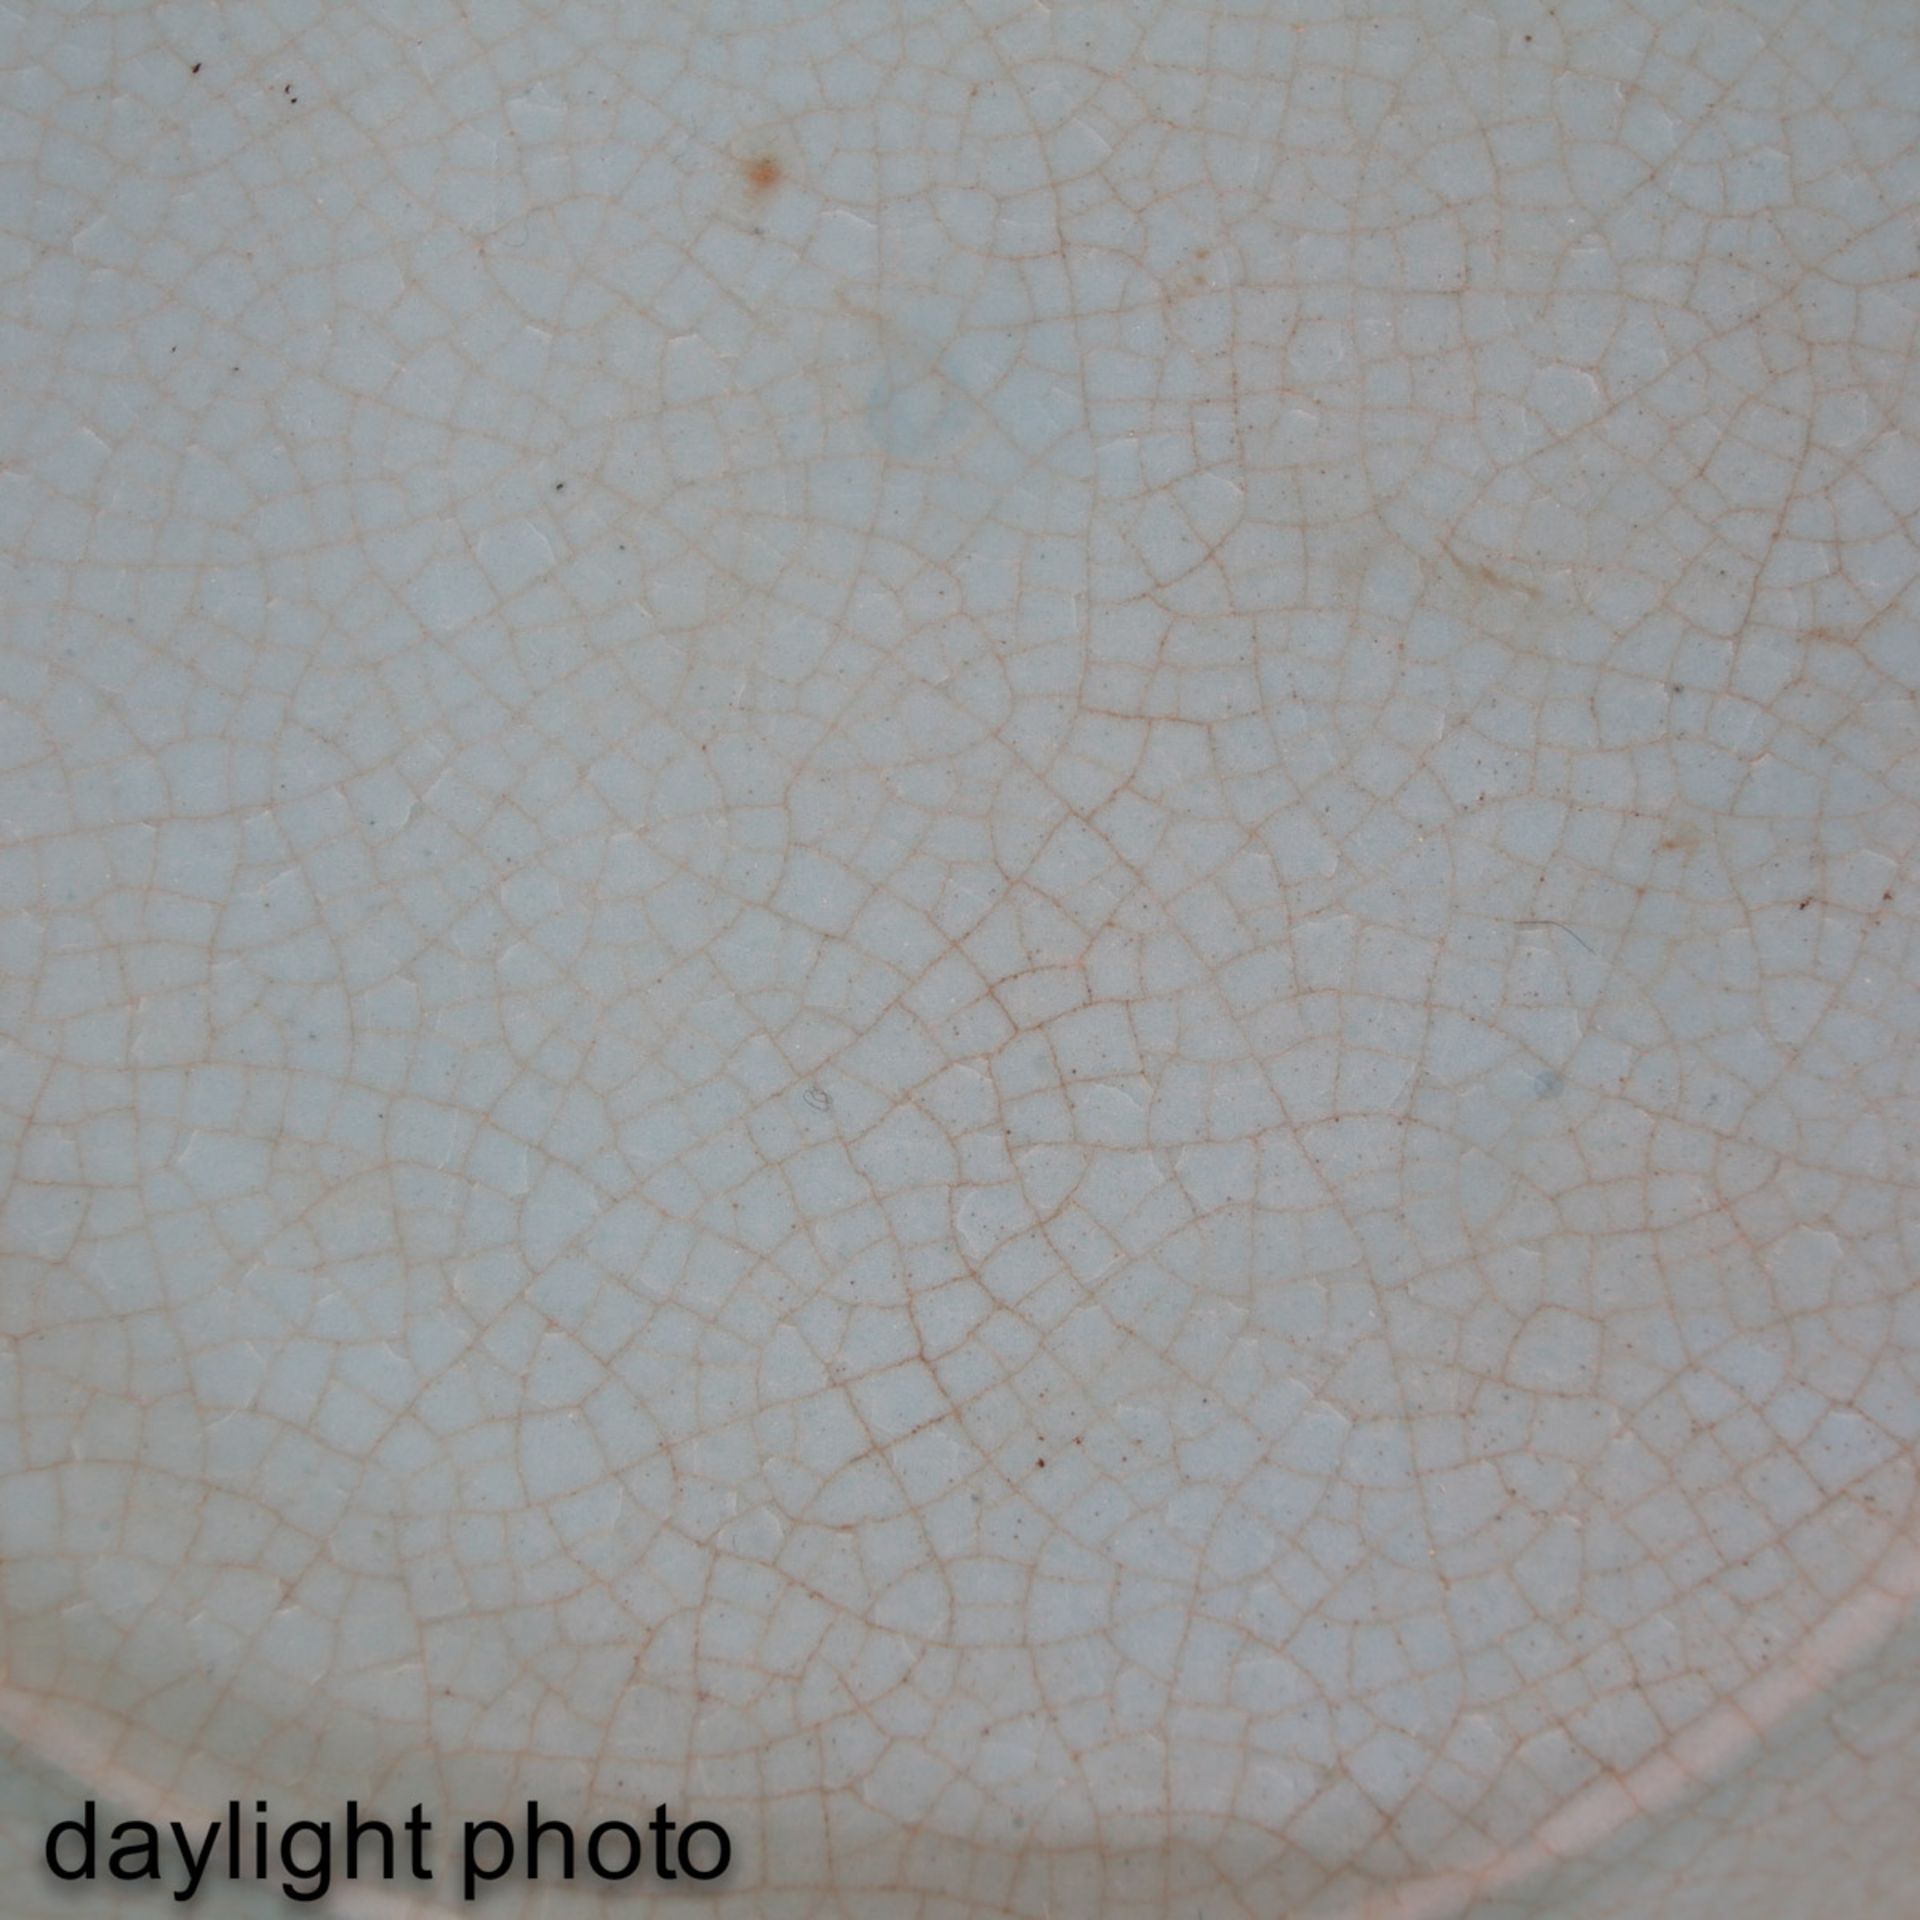 A Crackle-Ground Dish - Image 9 of 9